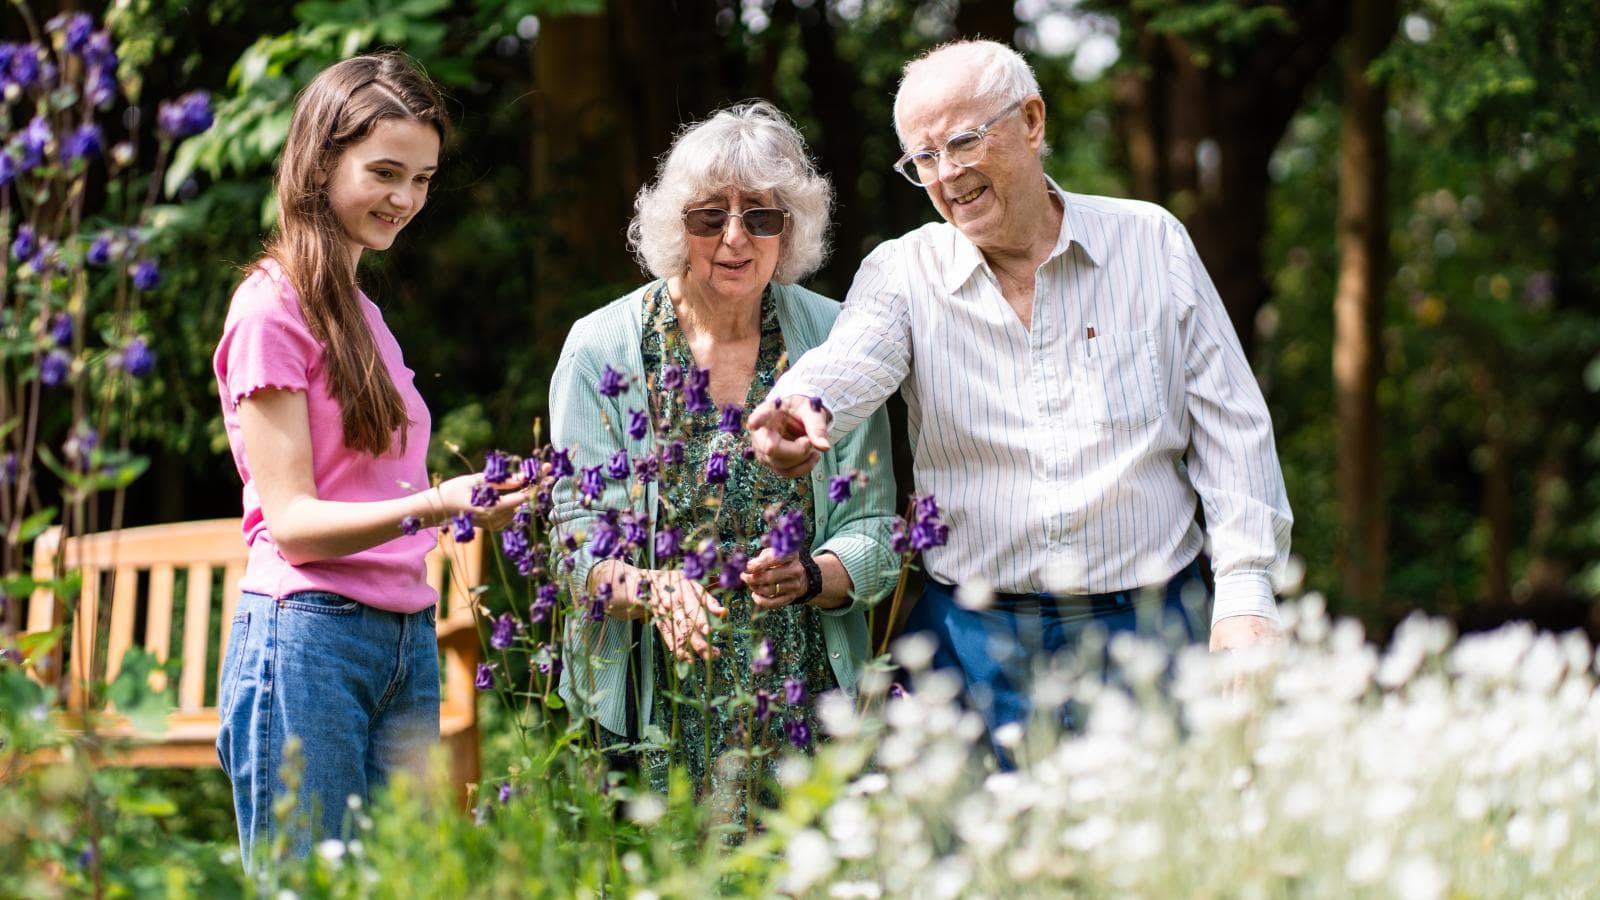 Grandparents pointing at flowers in garden with young granddaughter